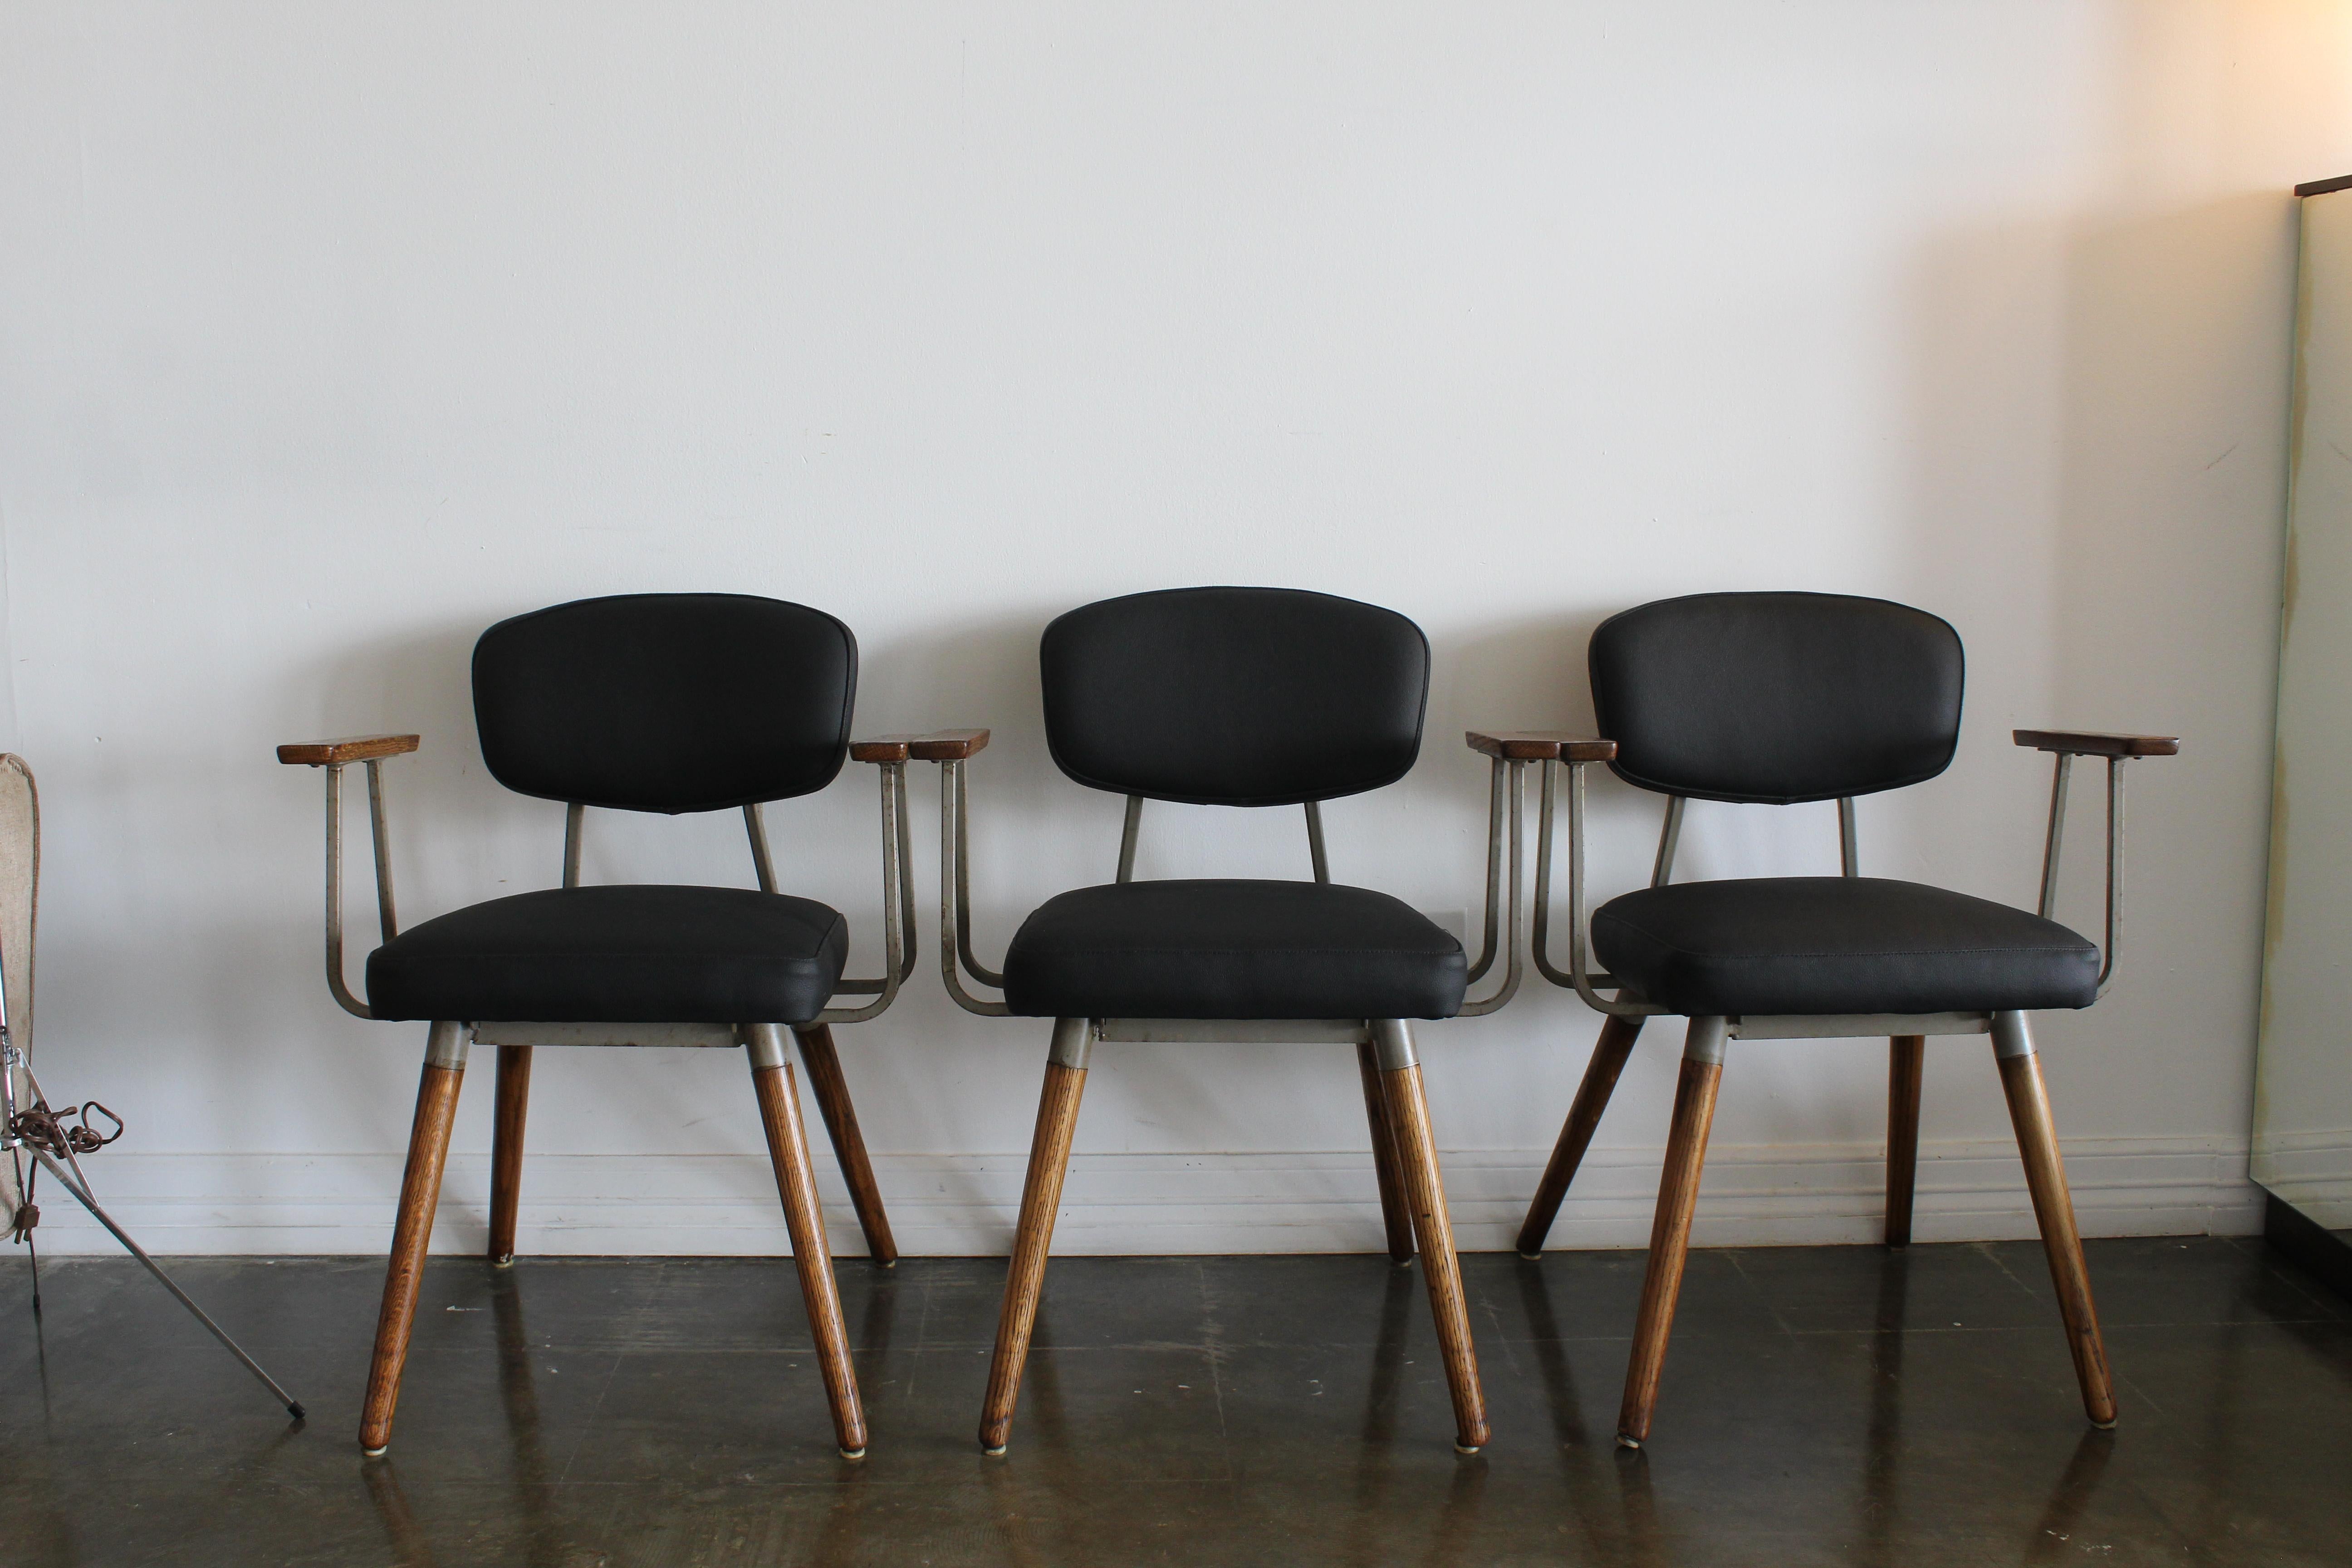 These lovely set of chairs once belonging to the college campus of University of Texas. recently upholstered in black leather these are perfect for desk chairs or dining chairs.